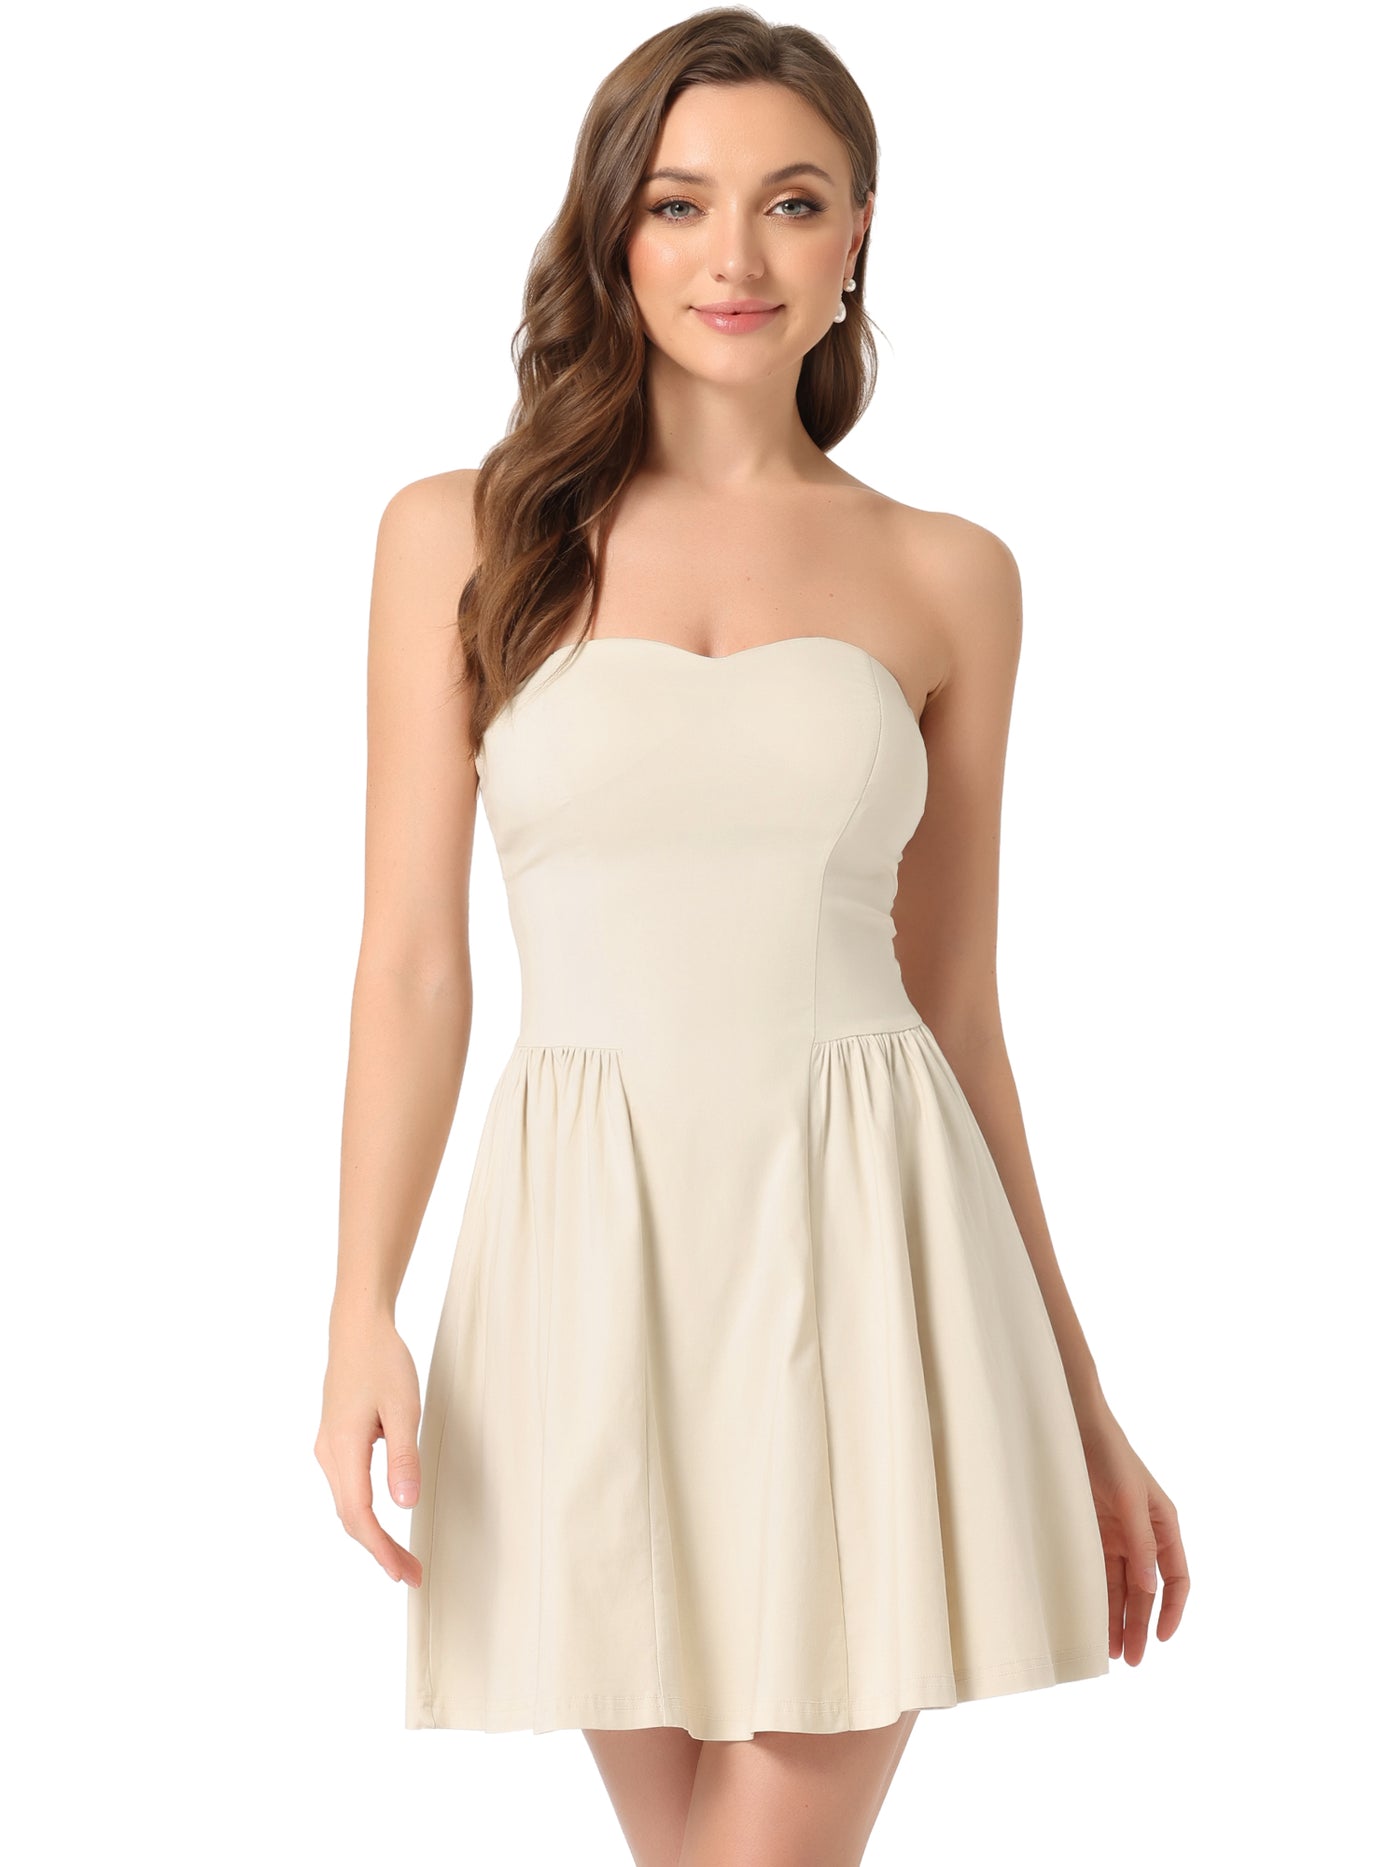 Allegra K Strapless Sweetheart Neck Fit And Flare Mini Tube Top Dress